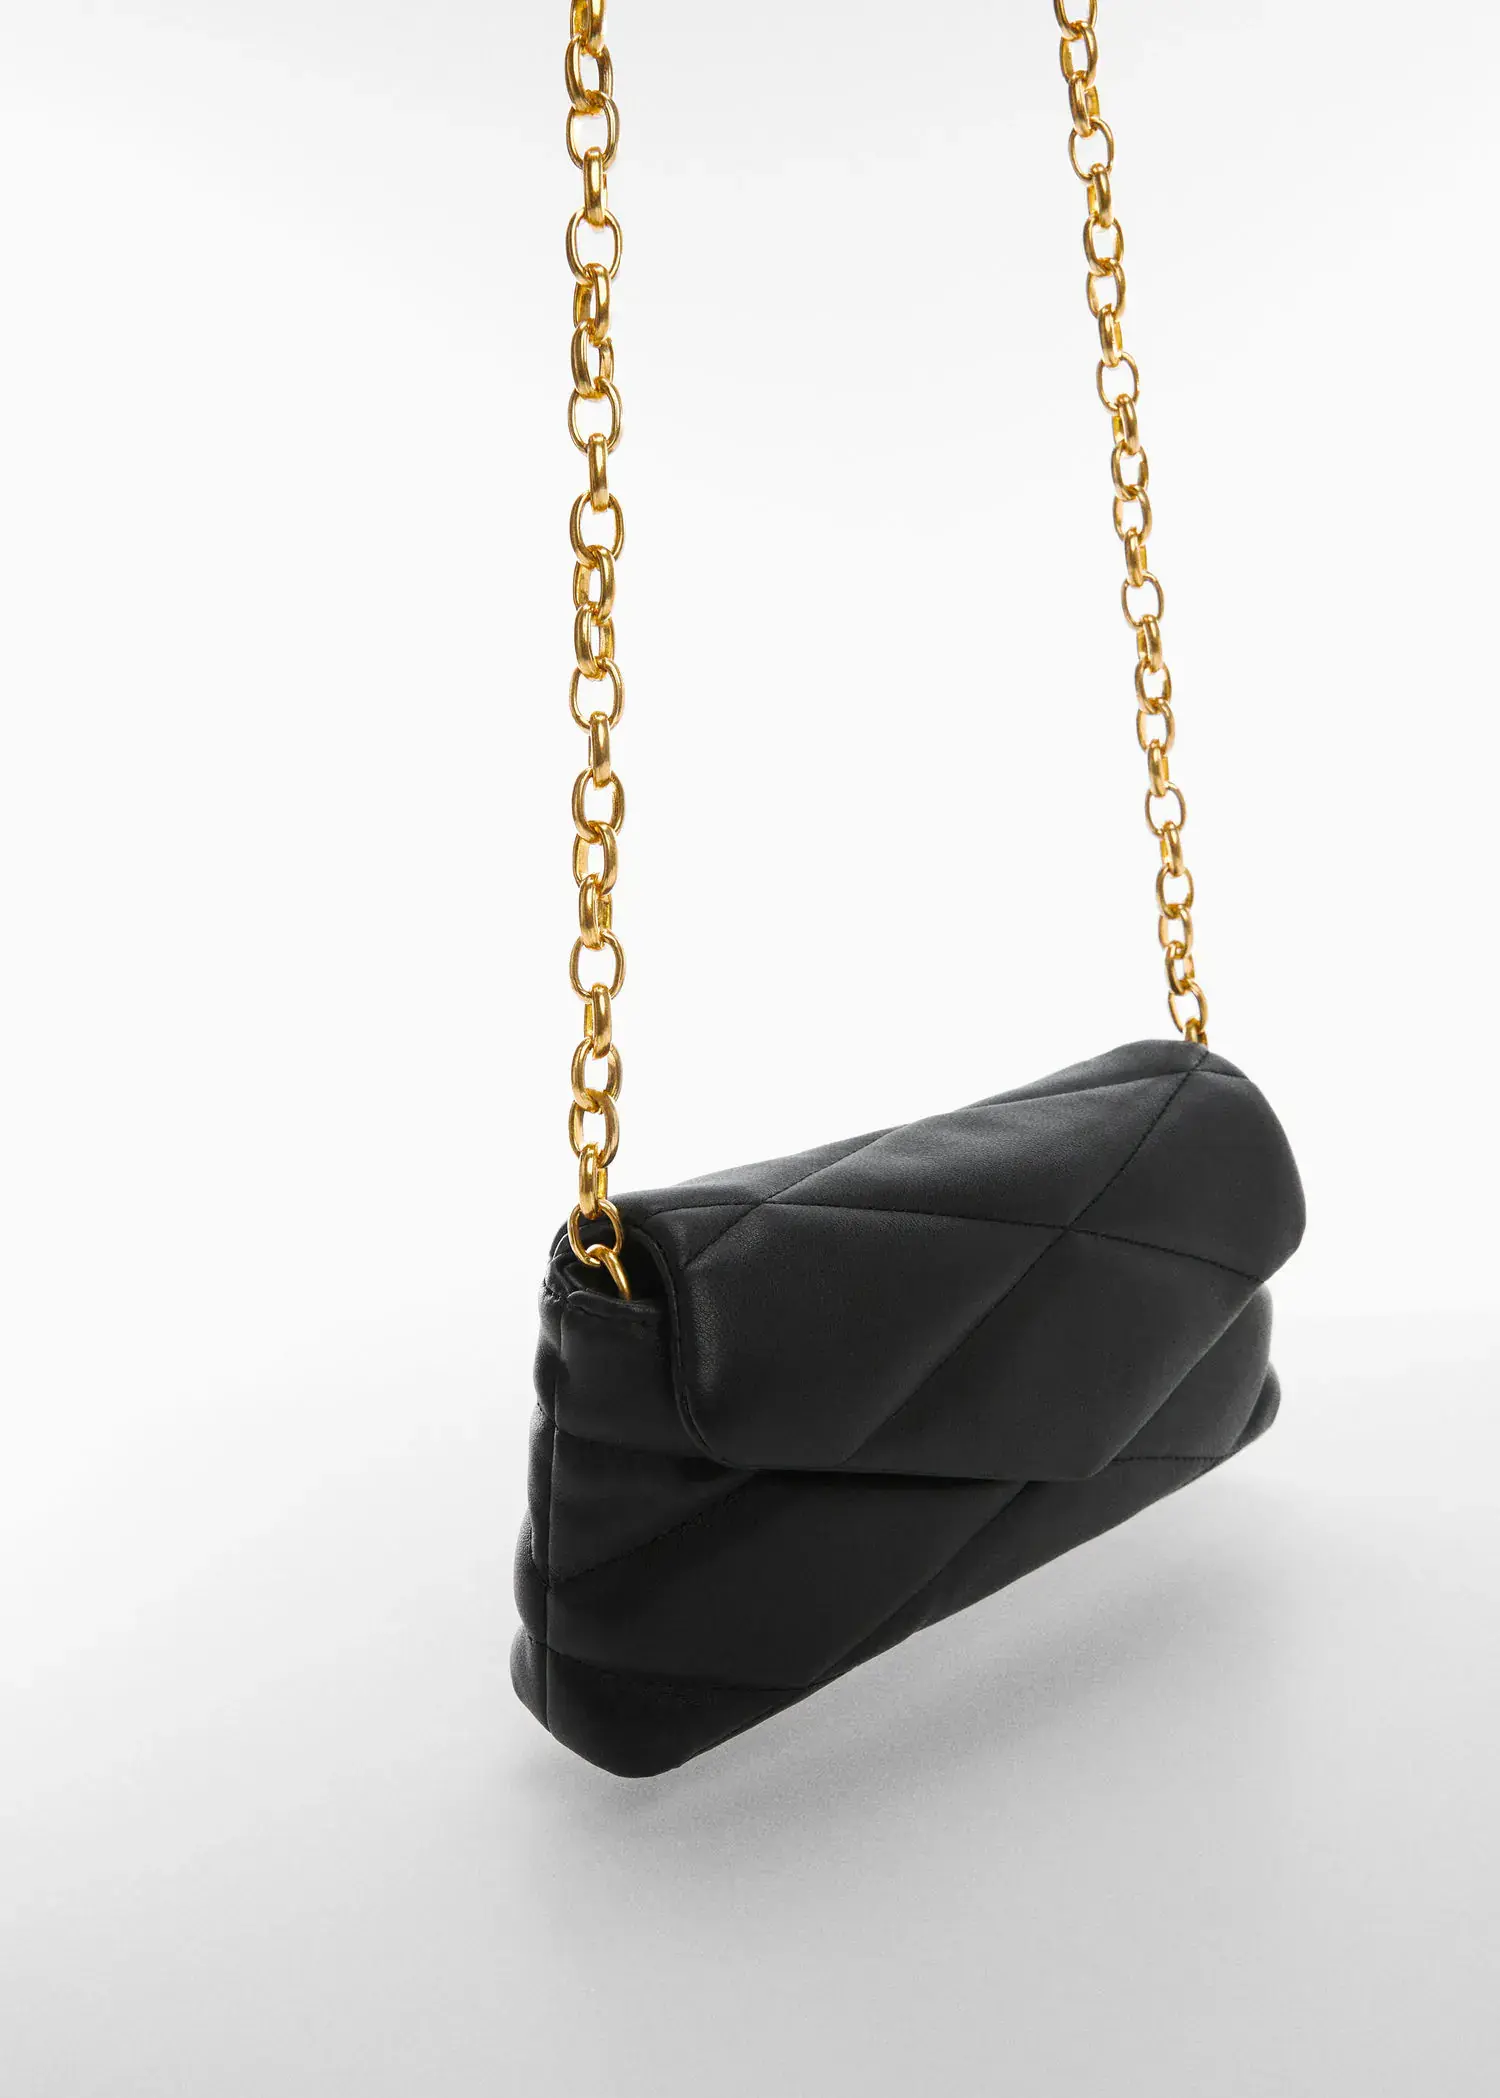 Mango Quilted chain bag. a black purse with a gold chain strap. 